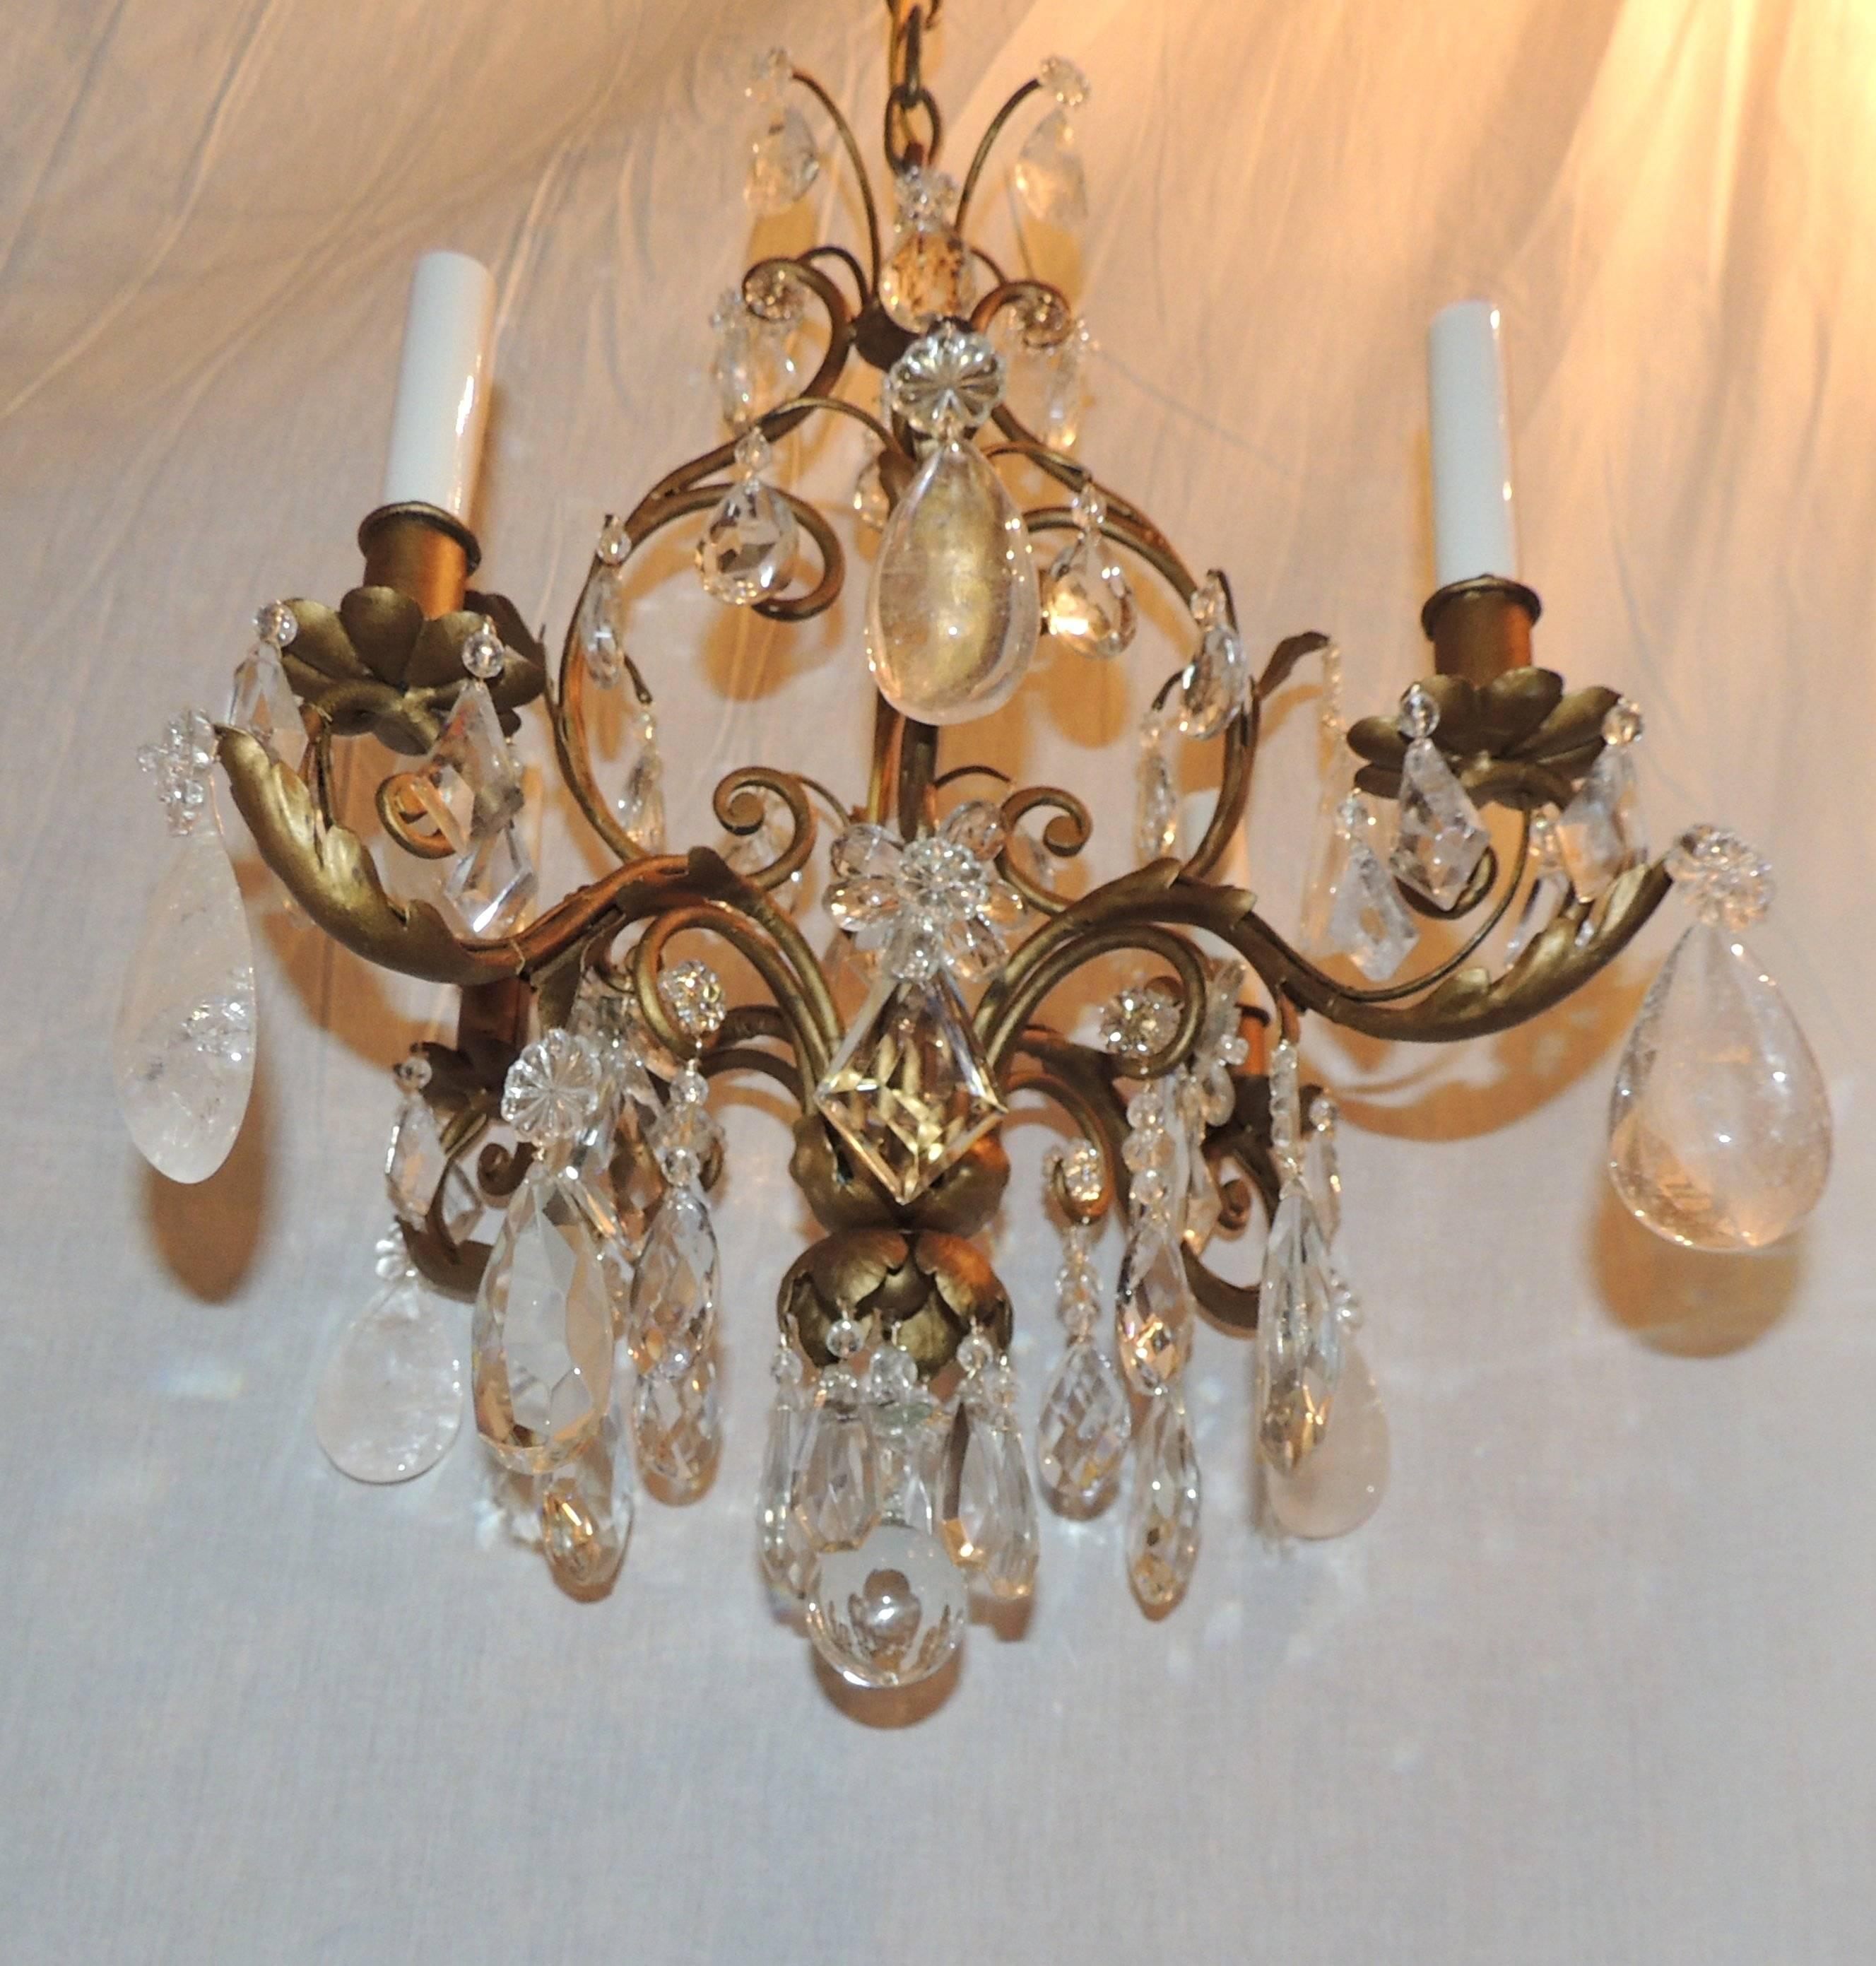 Wonderful Petite Vintage Baguès / Jansen Style Gilt Rock Crystal Chandelier Fixture With Scroll Decorative Body, Floral Accents And Clear And Rock Crystal Drops.

Measures: 18